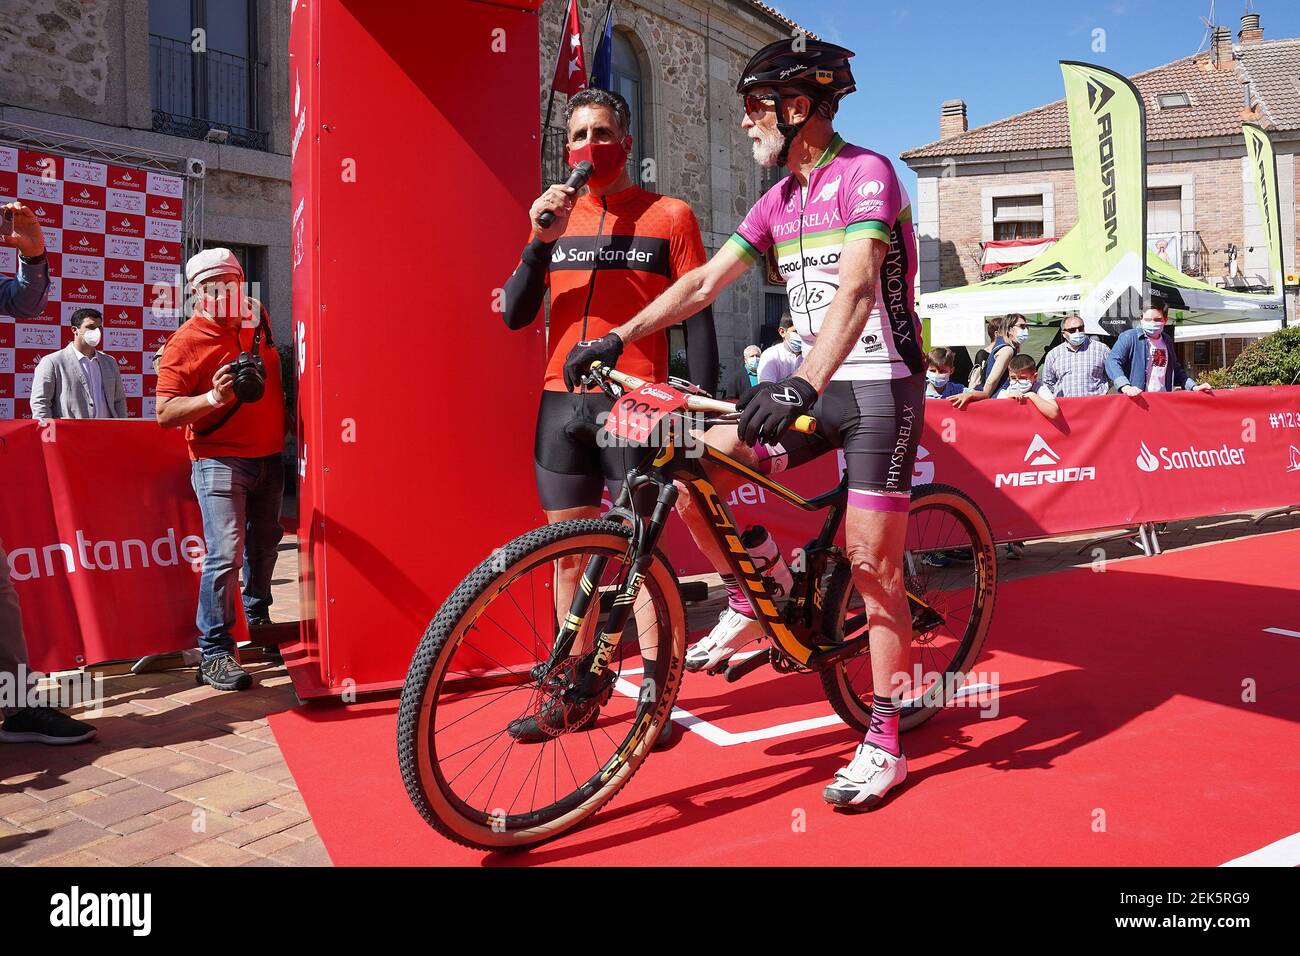 Spanish cycling legend Miguel Indurain (l) and Javier Sanchez 'Pelu'  runner-up in Europe Master 70 MBT, during Santander Reset, mountain bike  race, the first sports event for fans held in Spain after